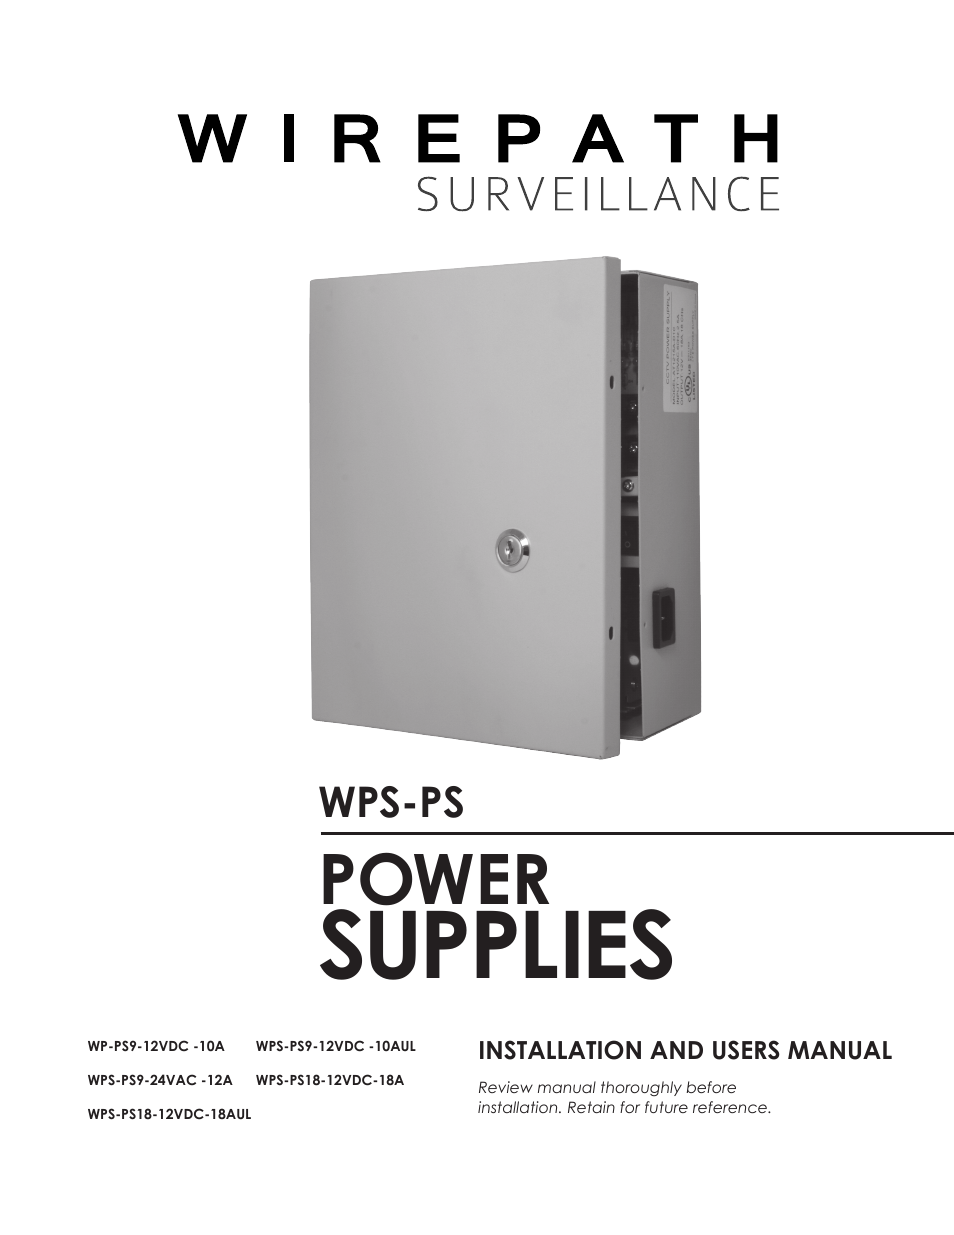 WPS-PS18-12VDC-18A WIREPATH - SURVEILLANCE 18 OUTPUT POWER SUPPLY 12V DC 18A PTC FUSES